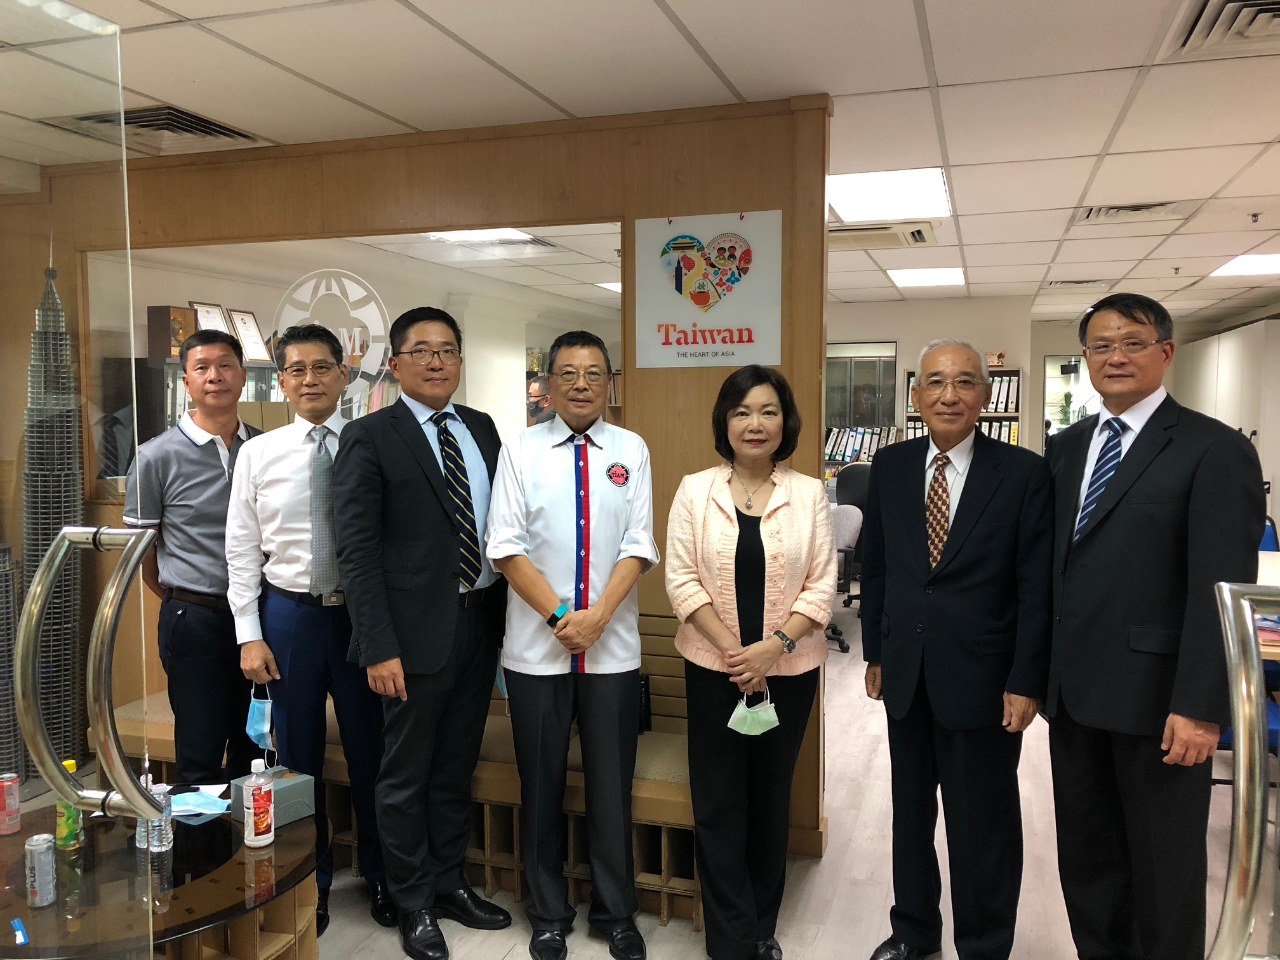 Representative Anne Hung (third from right) takes a group photo with members of the national committee of Taipei Investors´ Association in Malaysia.
